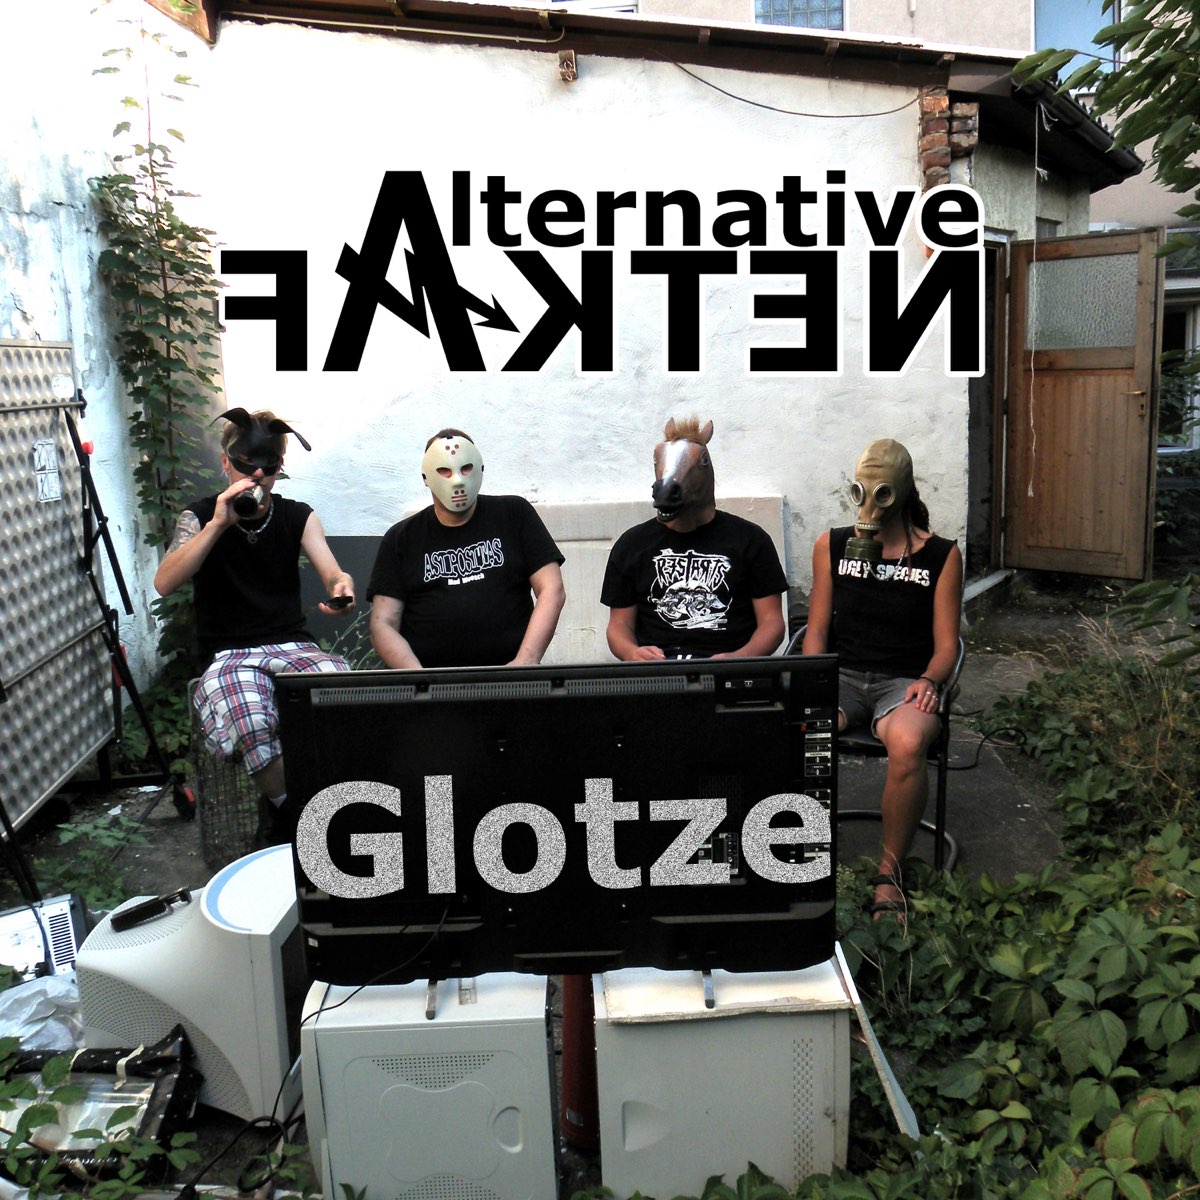 Glotze. Alternative. Counterparts - a Eulogy for those still here (2022).